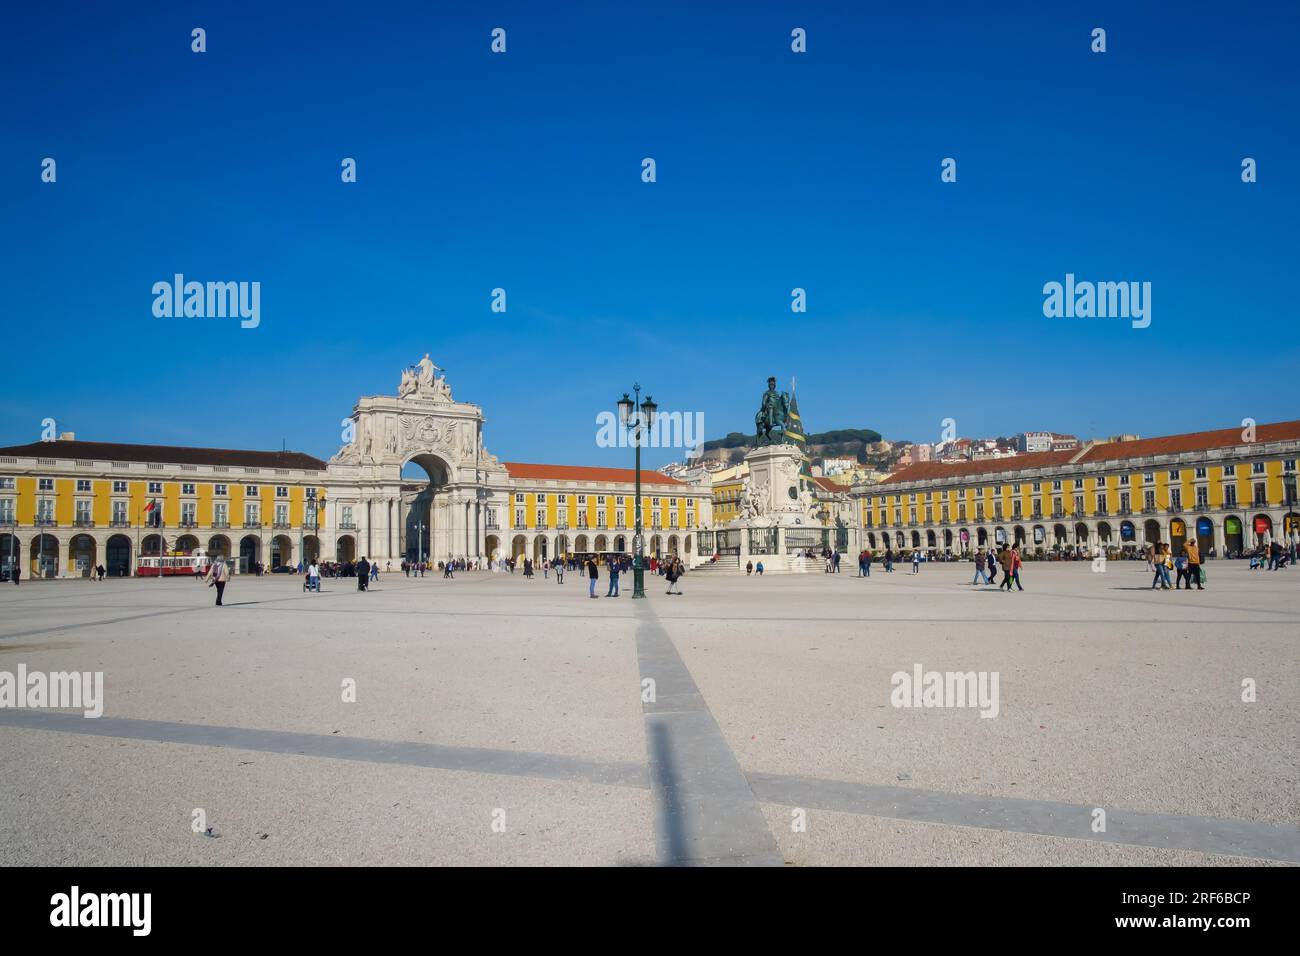 Lisbon, Portugal - January 8, 2020 : Panoramic view of the Praça do Comércio, a Commerce Square in the capital of Portugal Lisbon Stock Photo